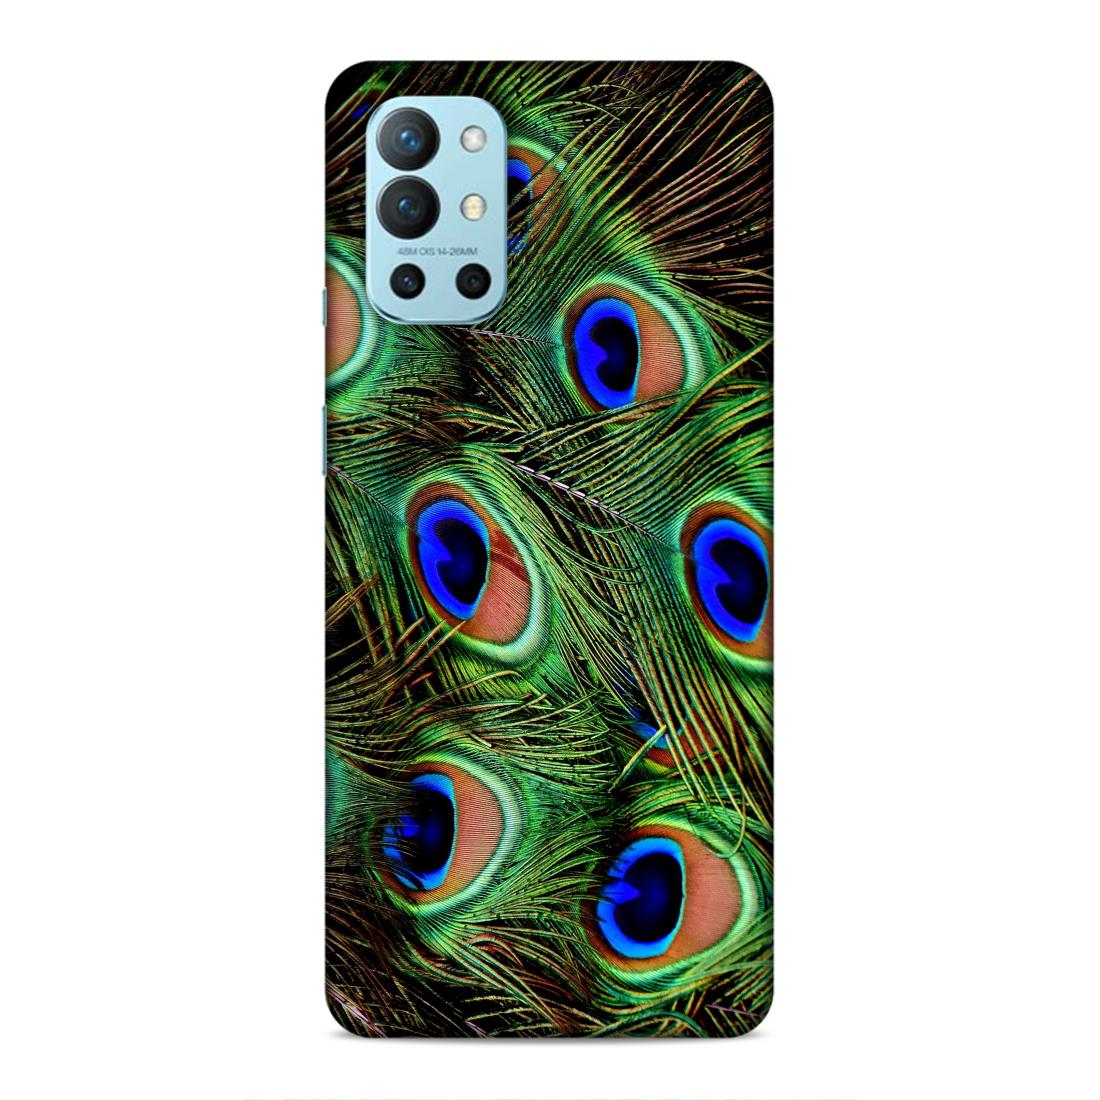 Peacock Feather Hard Back Case For OnePlus 8T / 9R